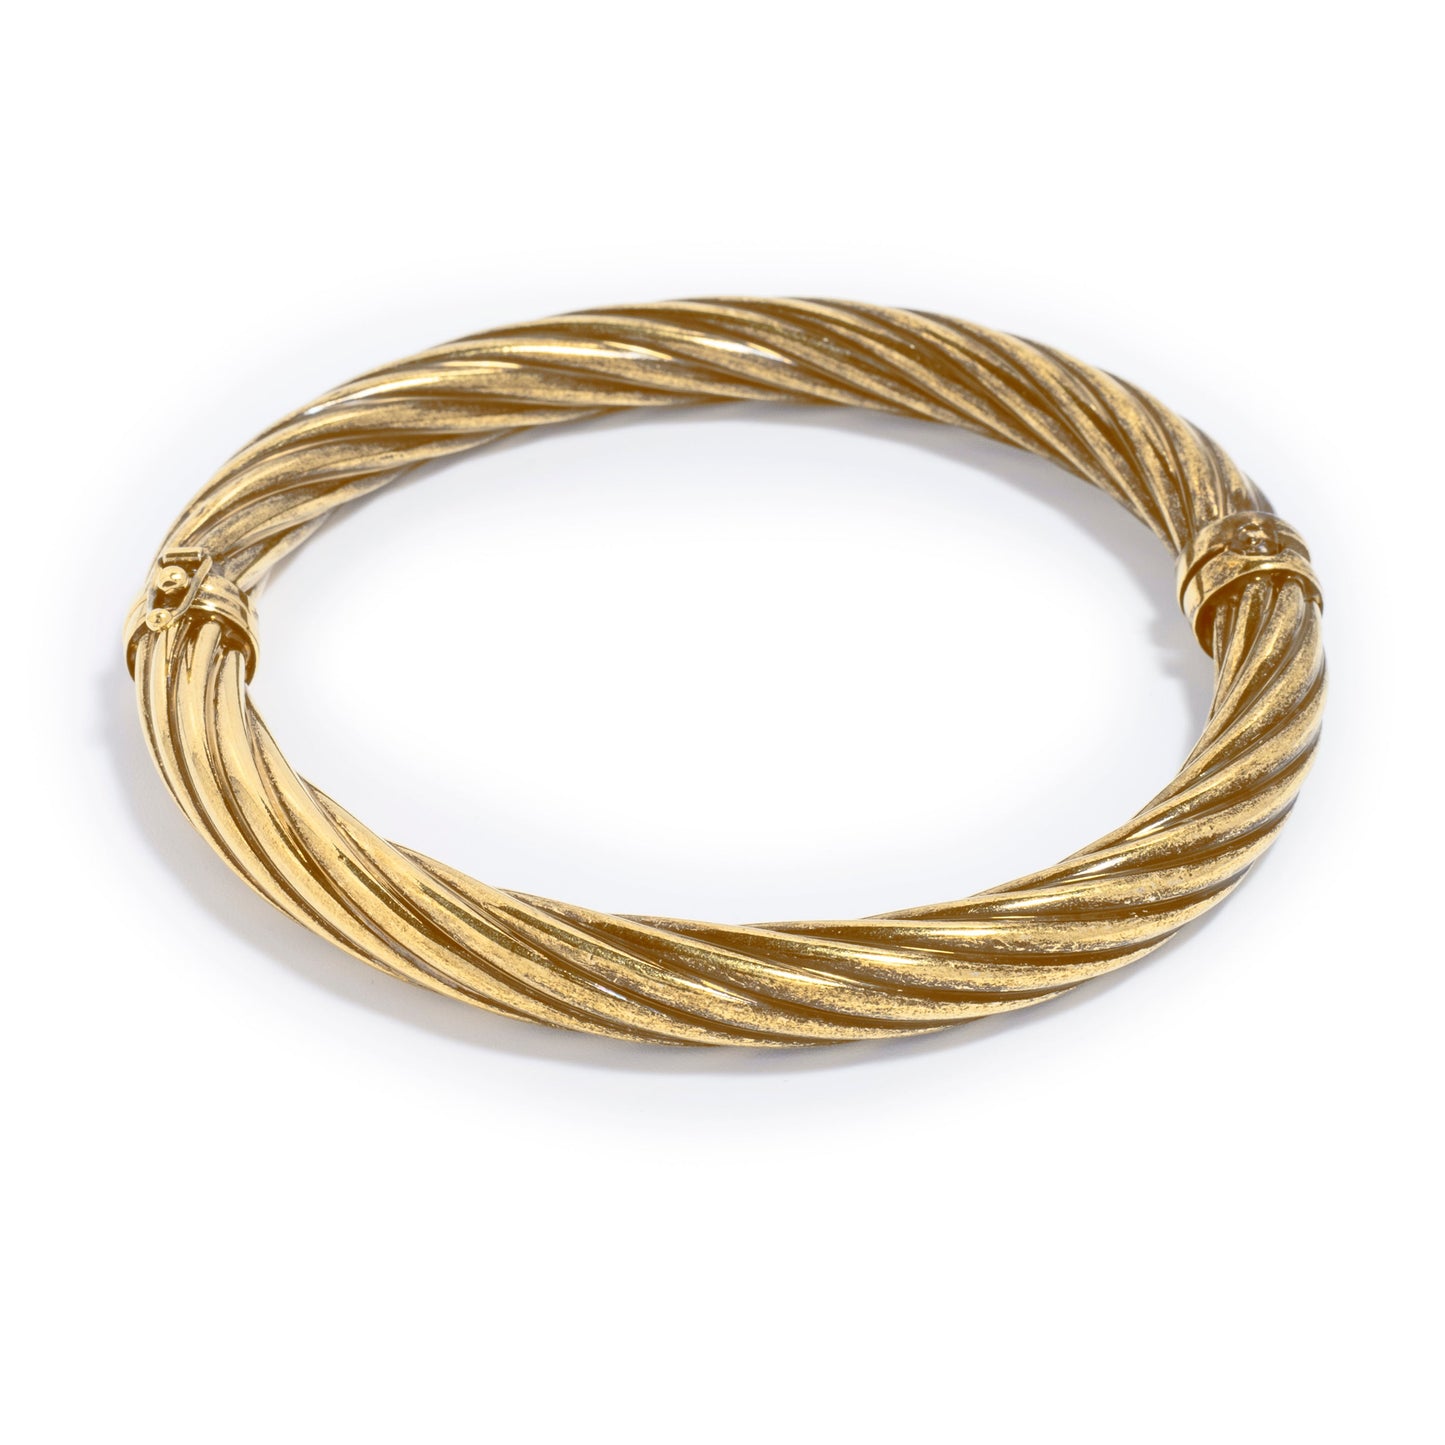 8" Antique Yellow Gold Twisted Oval Bangle